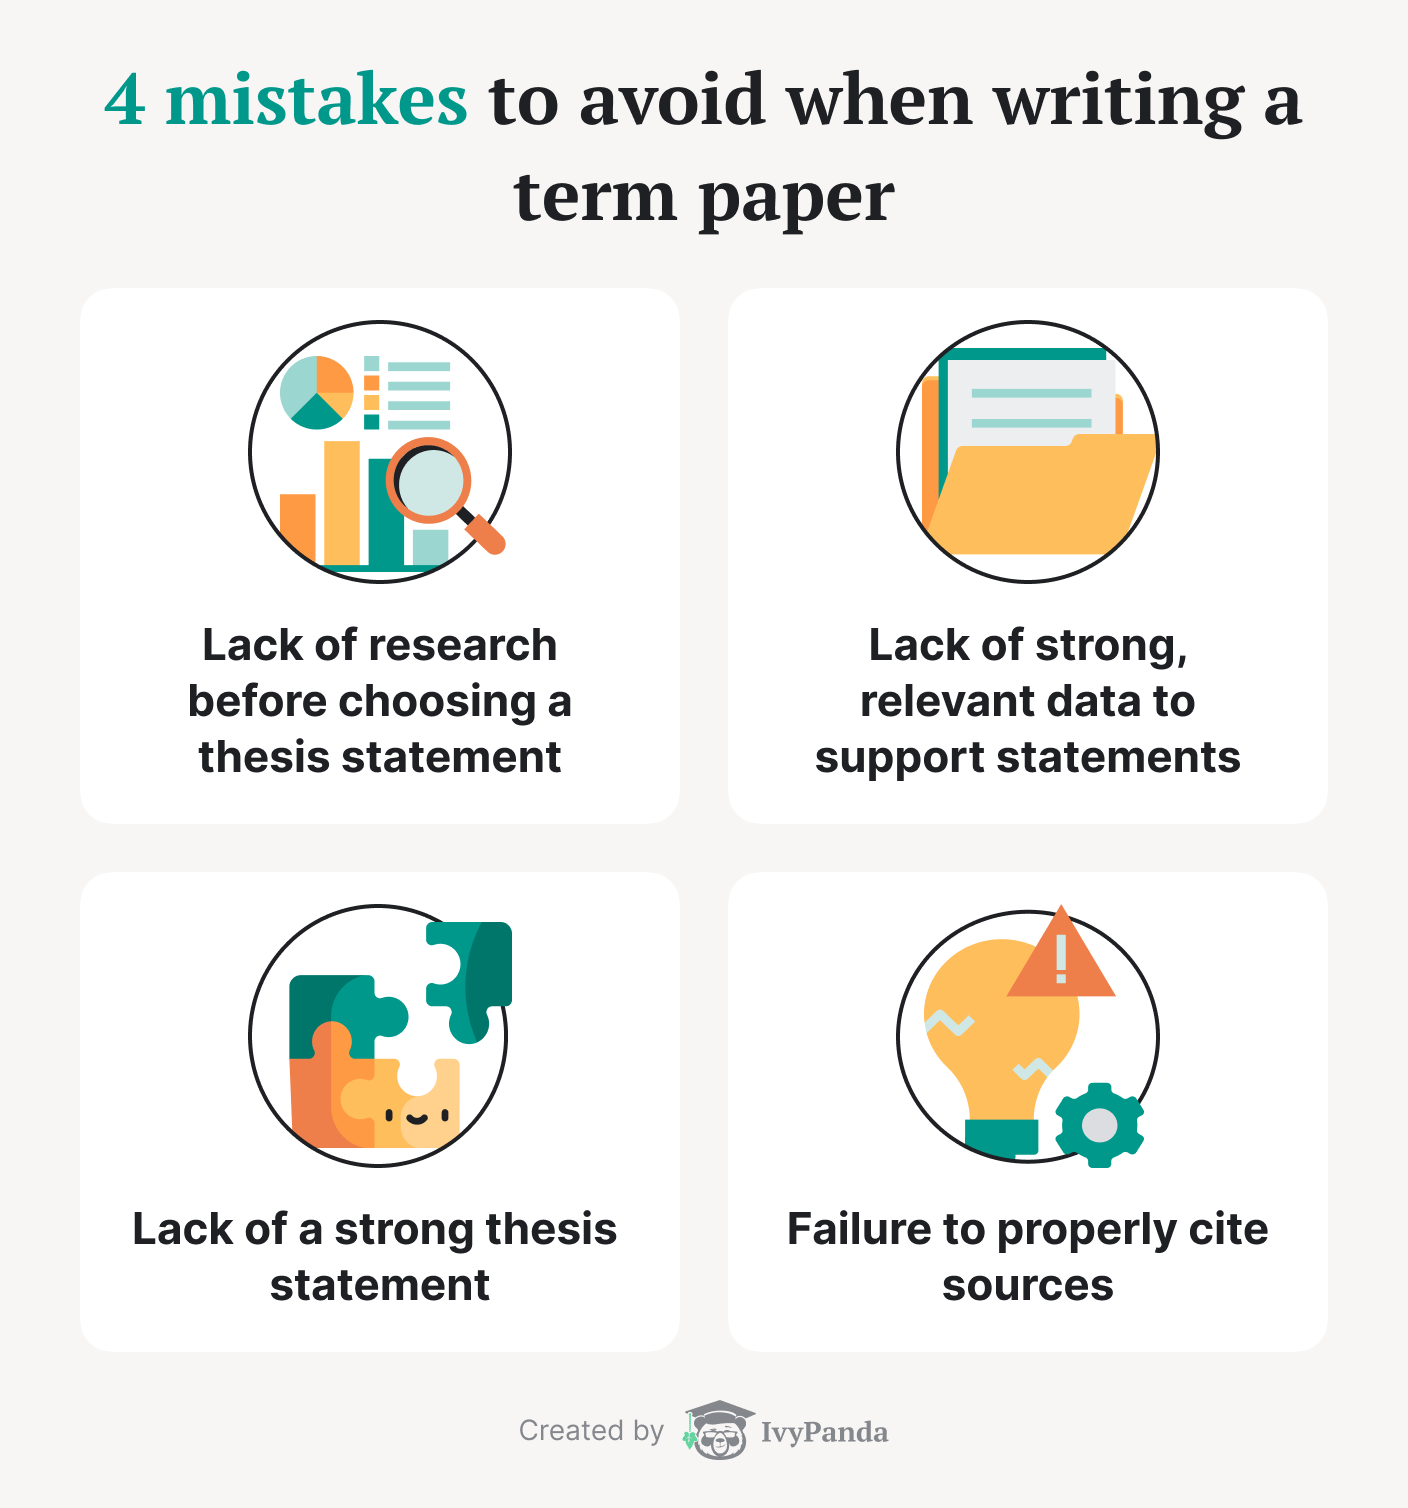 4 mistakes to avoid when writing a term paper.